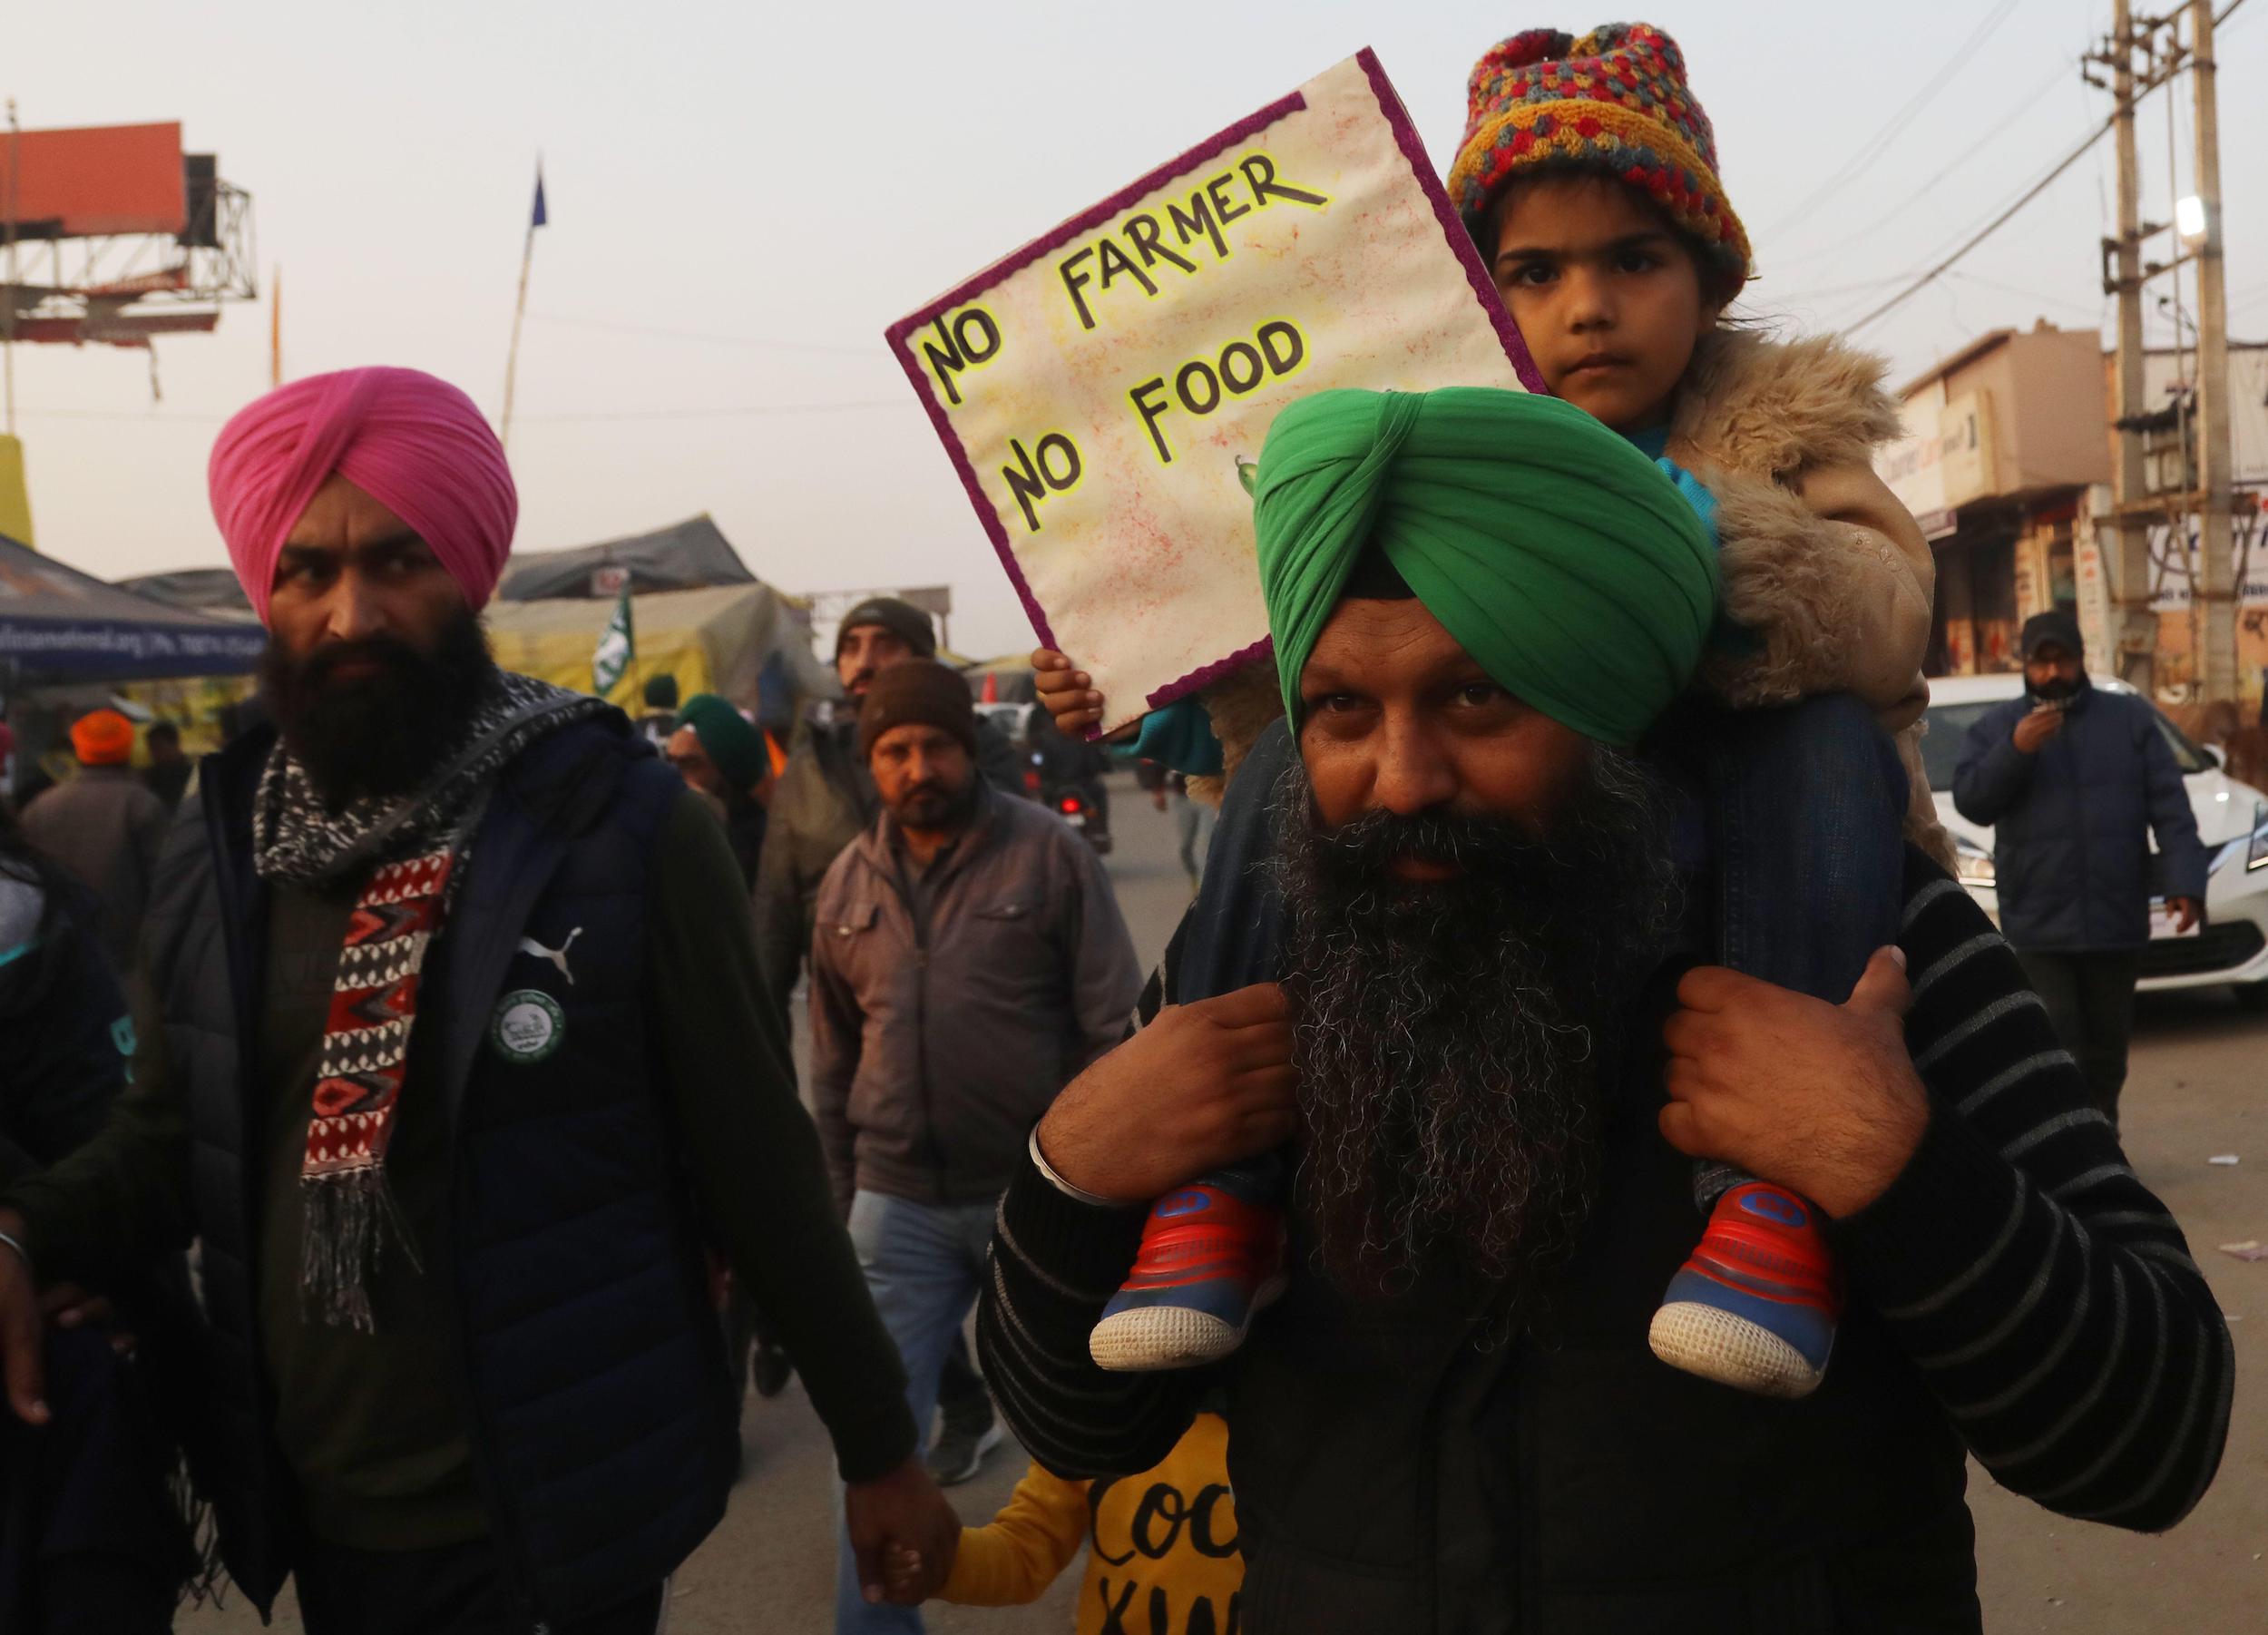 Protesters in New Delhi, India, January 2021 [Image by: Naveen Sharma/SOPA Images via ZUMA Wire]